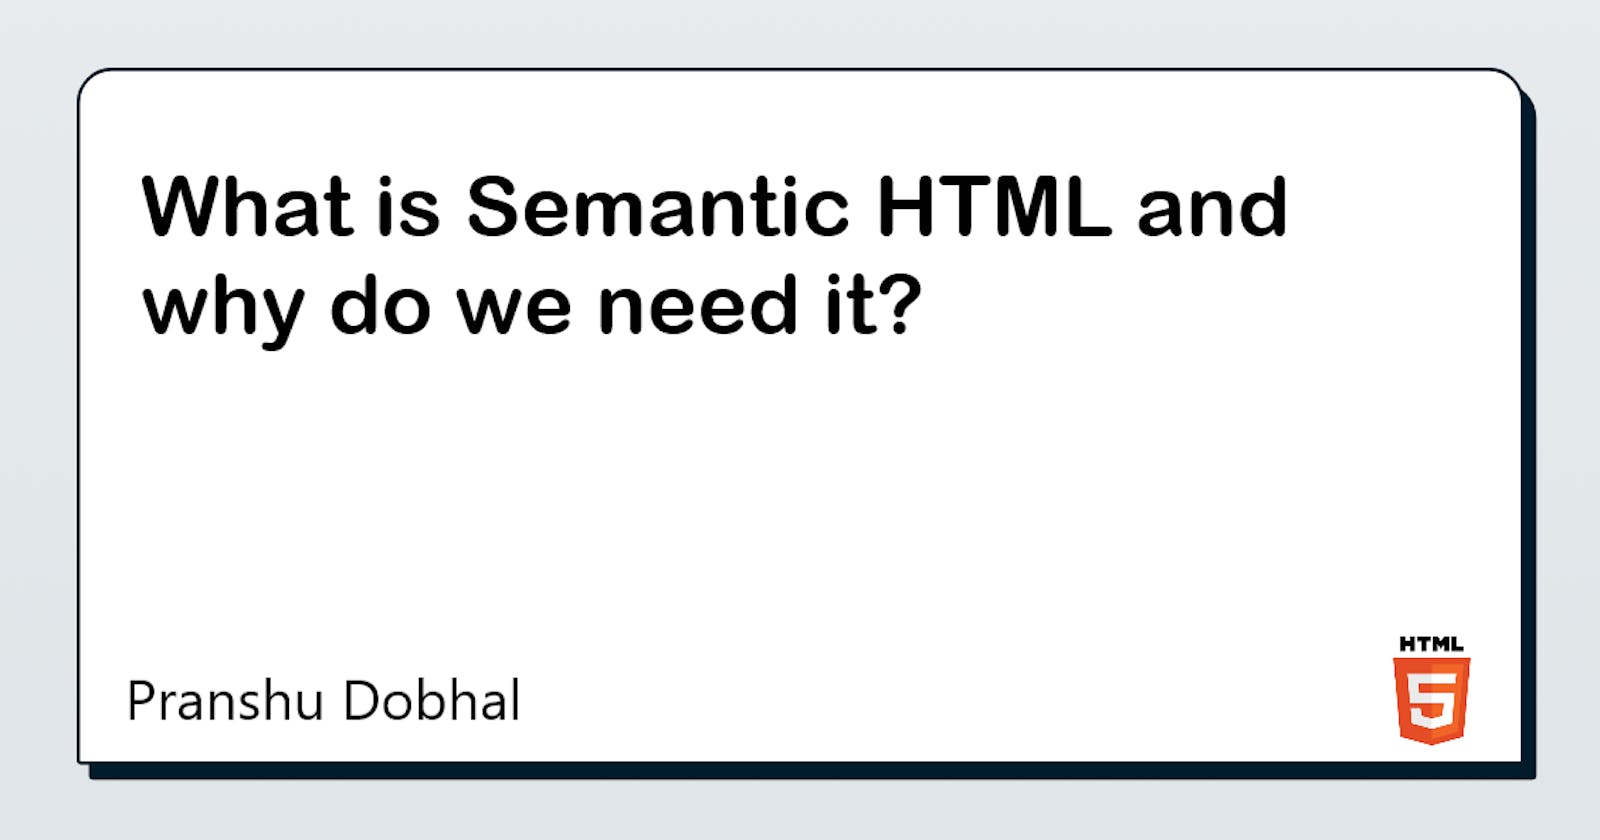 Cover Image for What is Semantic HTML and why do you need it?